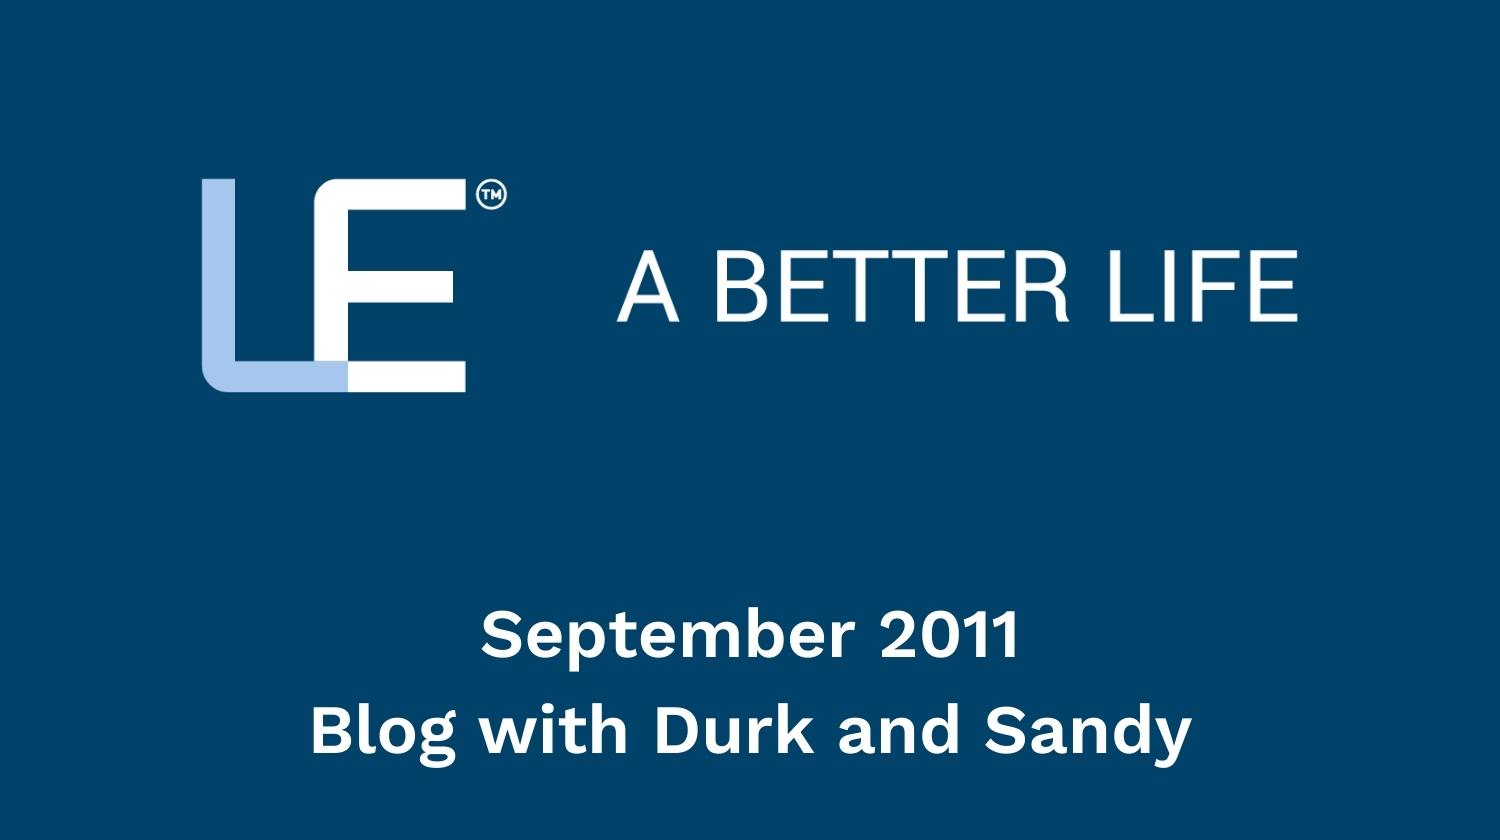 September 2011 Blog with Durk and Sandy